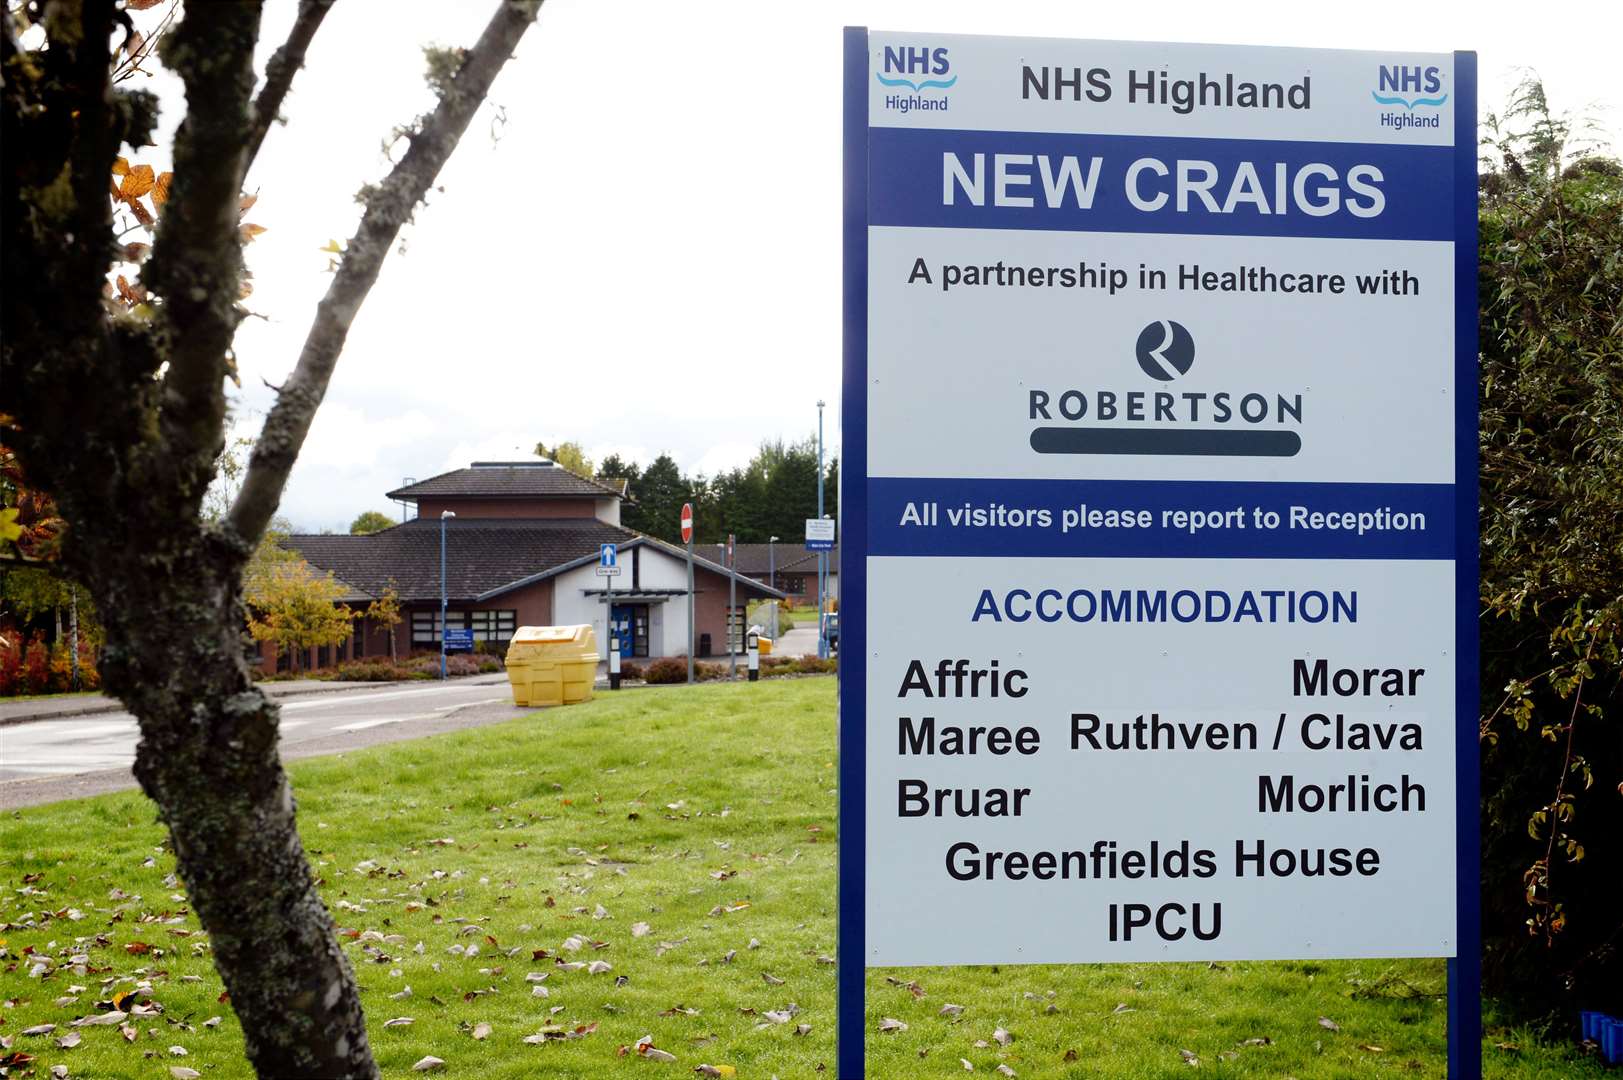 New Craigs is amongst the hospitals where restrictions on visiting are being lifted.